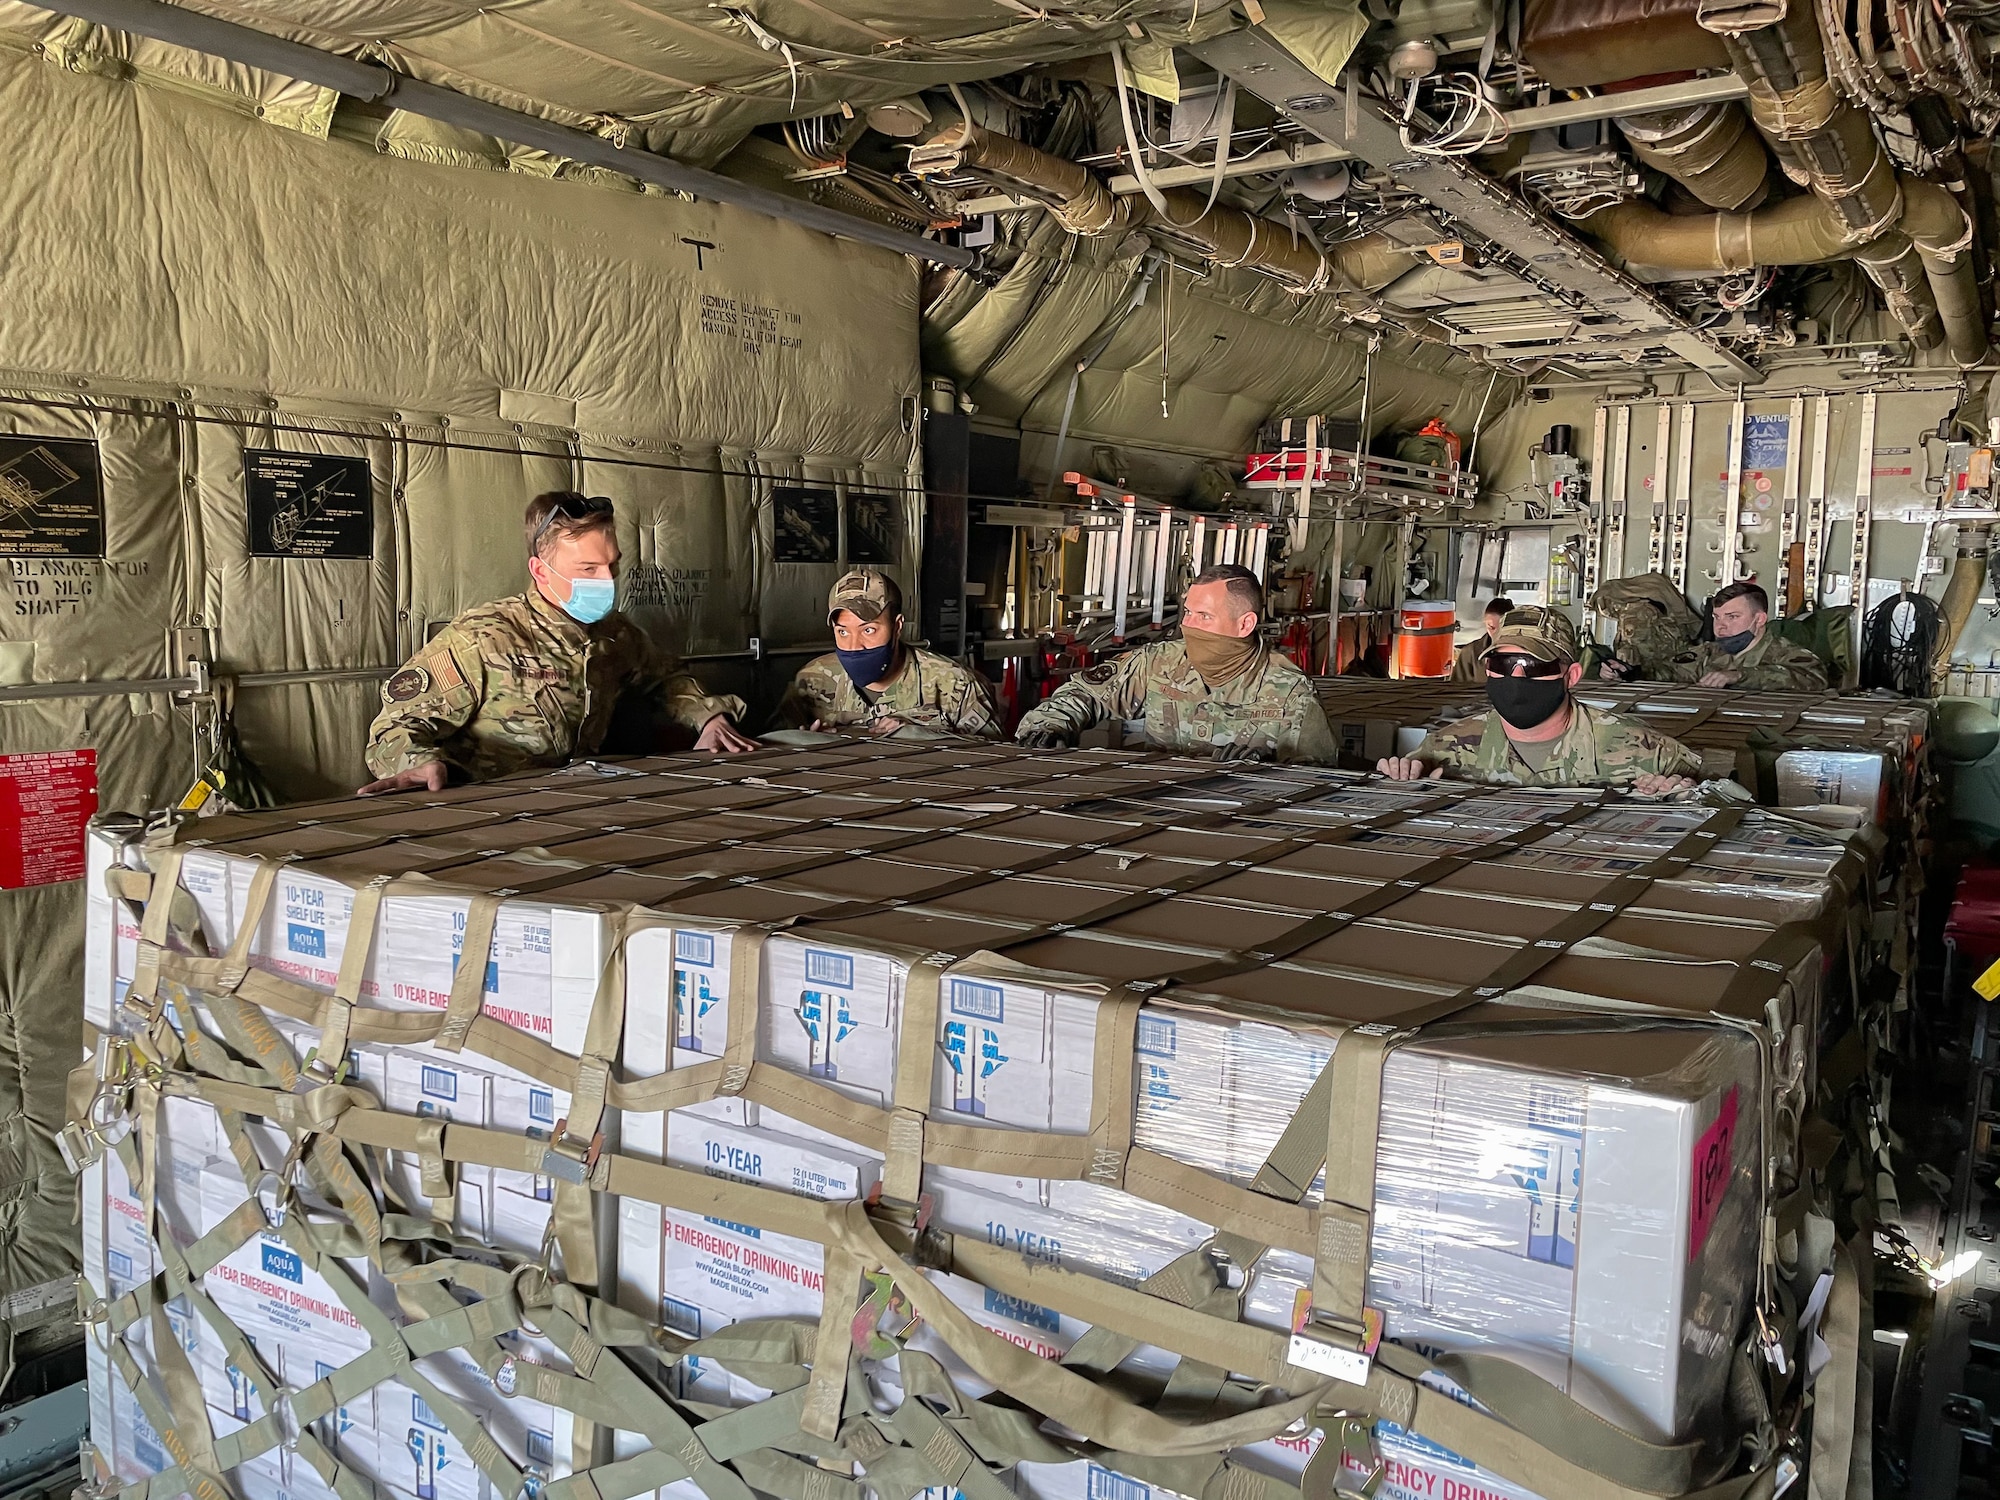 Airmen from the Kentucky Air National Guard deliver relief supplies to Abilene, Texas Feb. 23, 2021,  following a winter storm that left millions without electricity or potable water for days. The supplies, flown aboard a C-130 Hercules aircraft from the Louisville, Kentucky-based 123rd Airlift Wing, include food and bottled water. (U.S. Air National Guard photo)